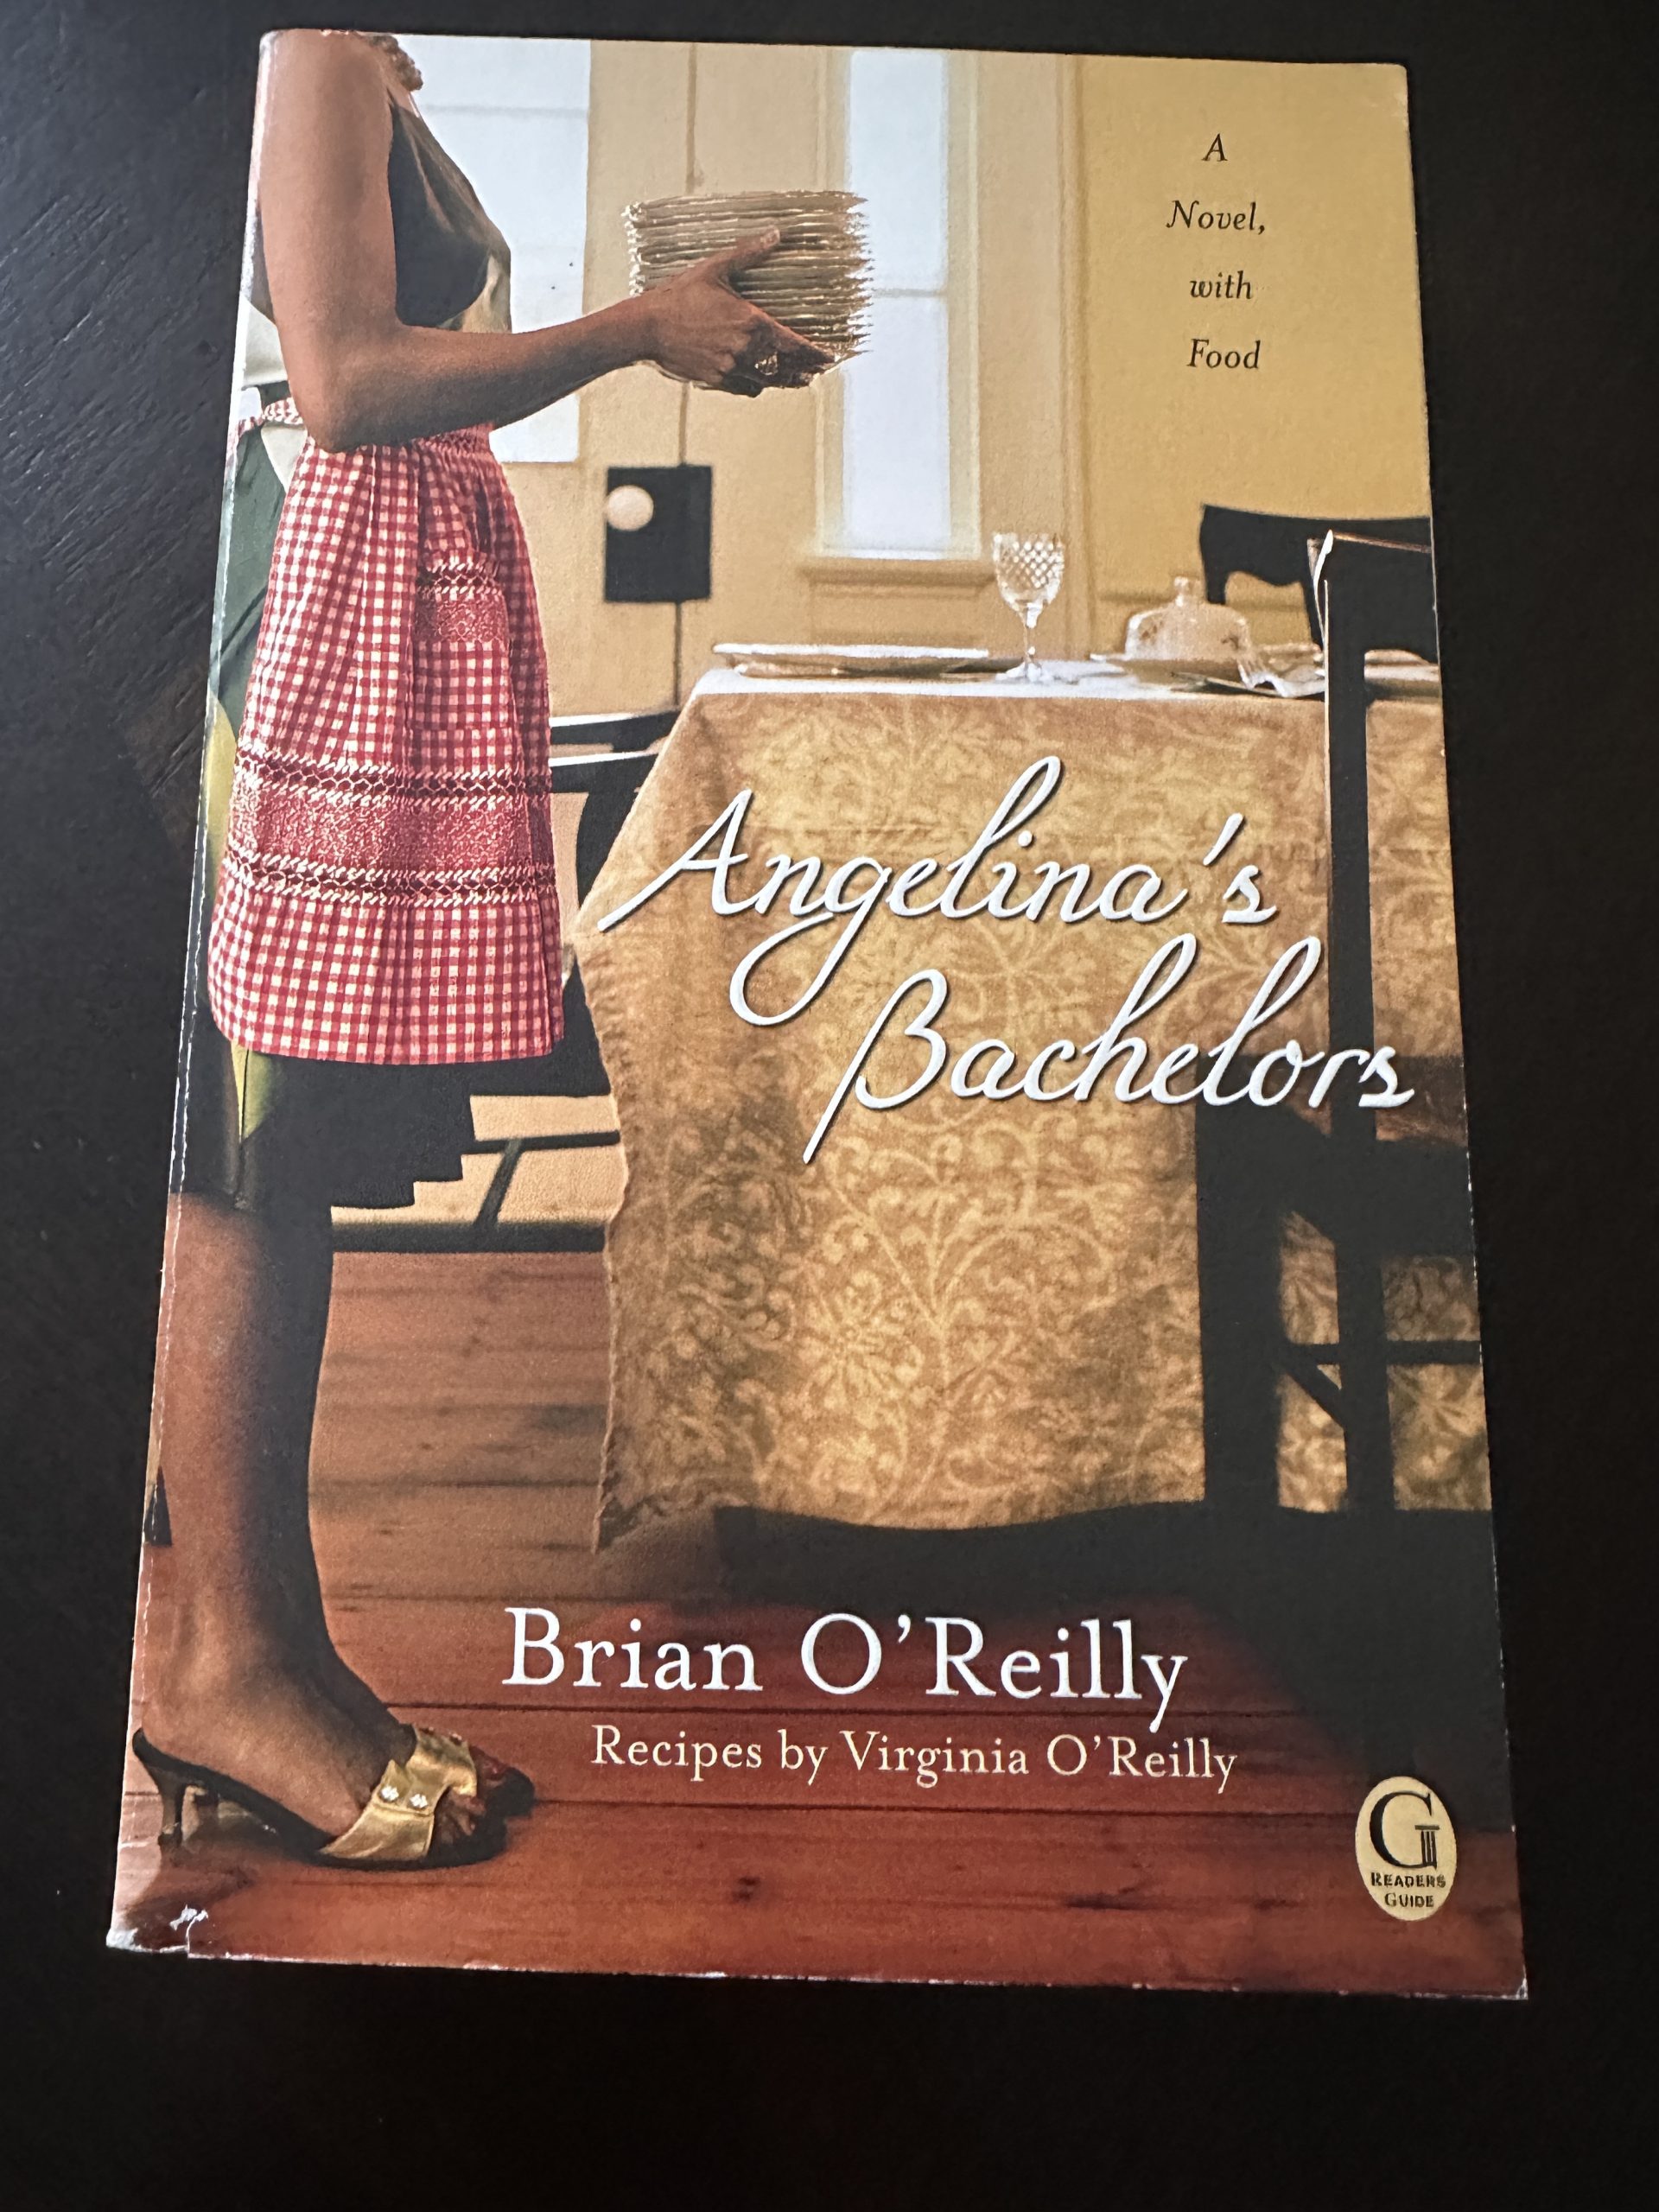 Angelina's Bachelors by Brian O'Reilly